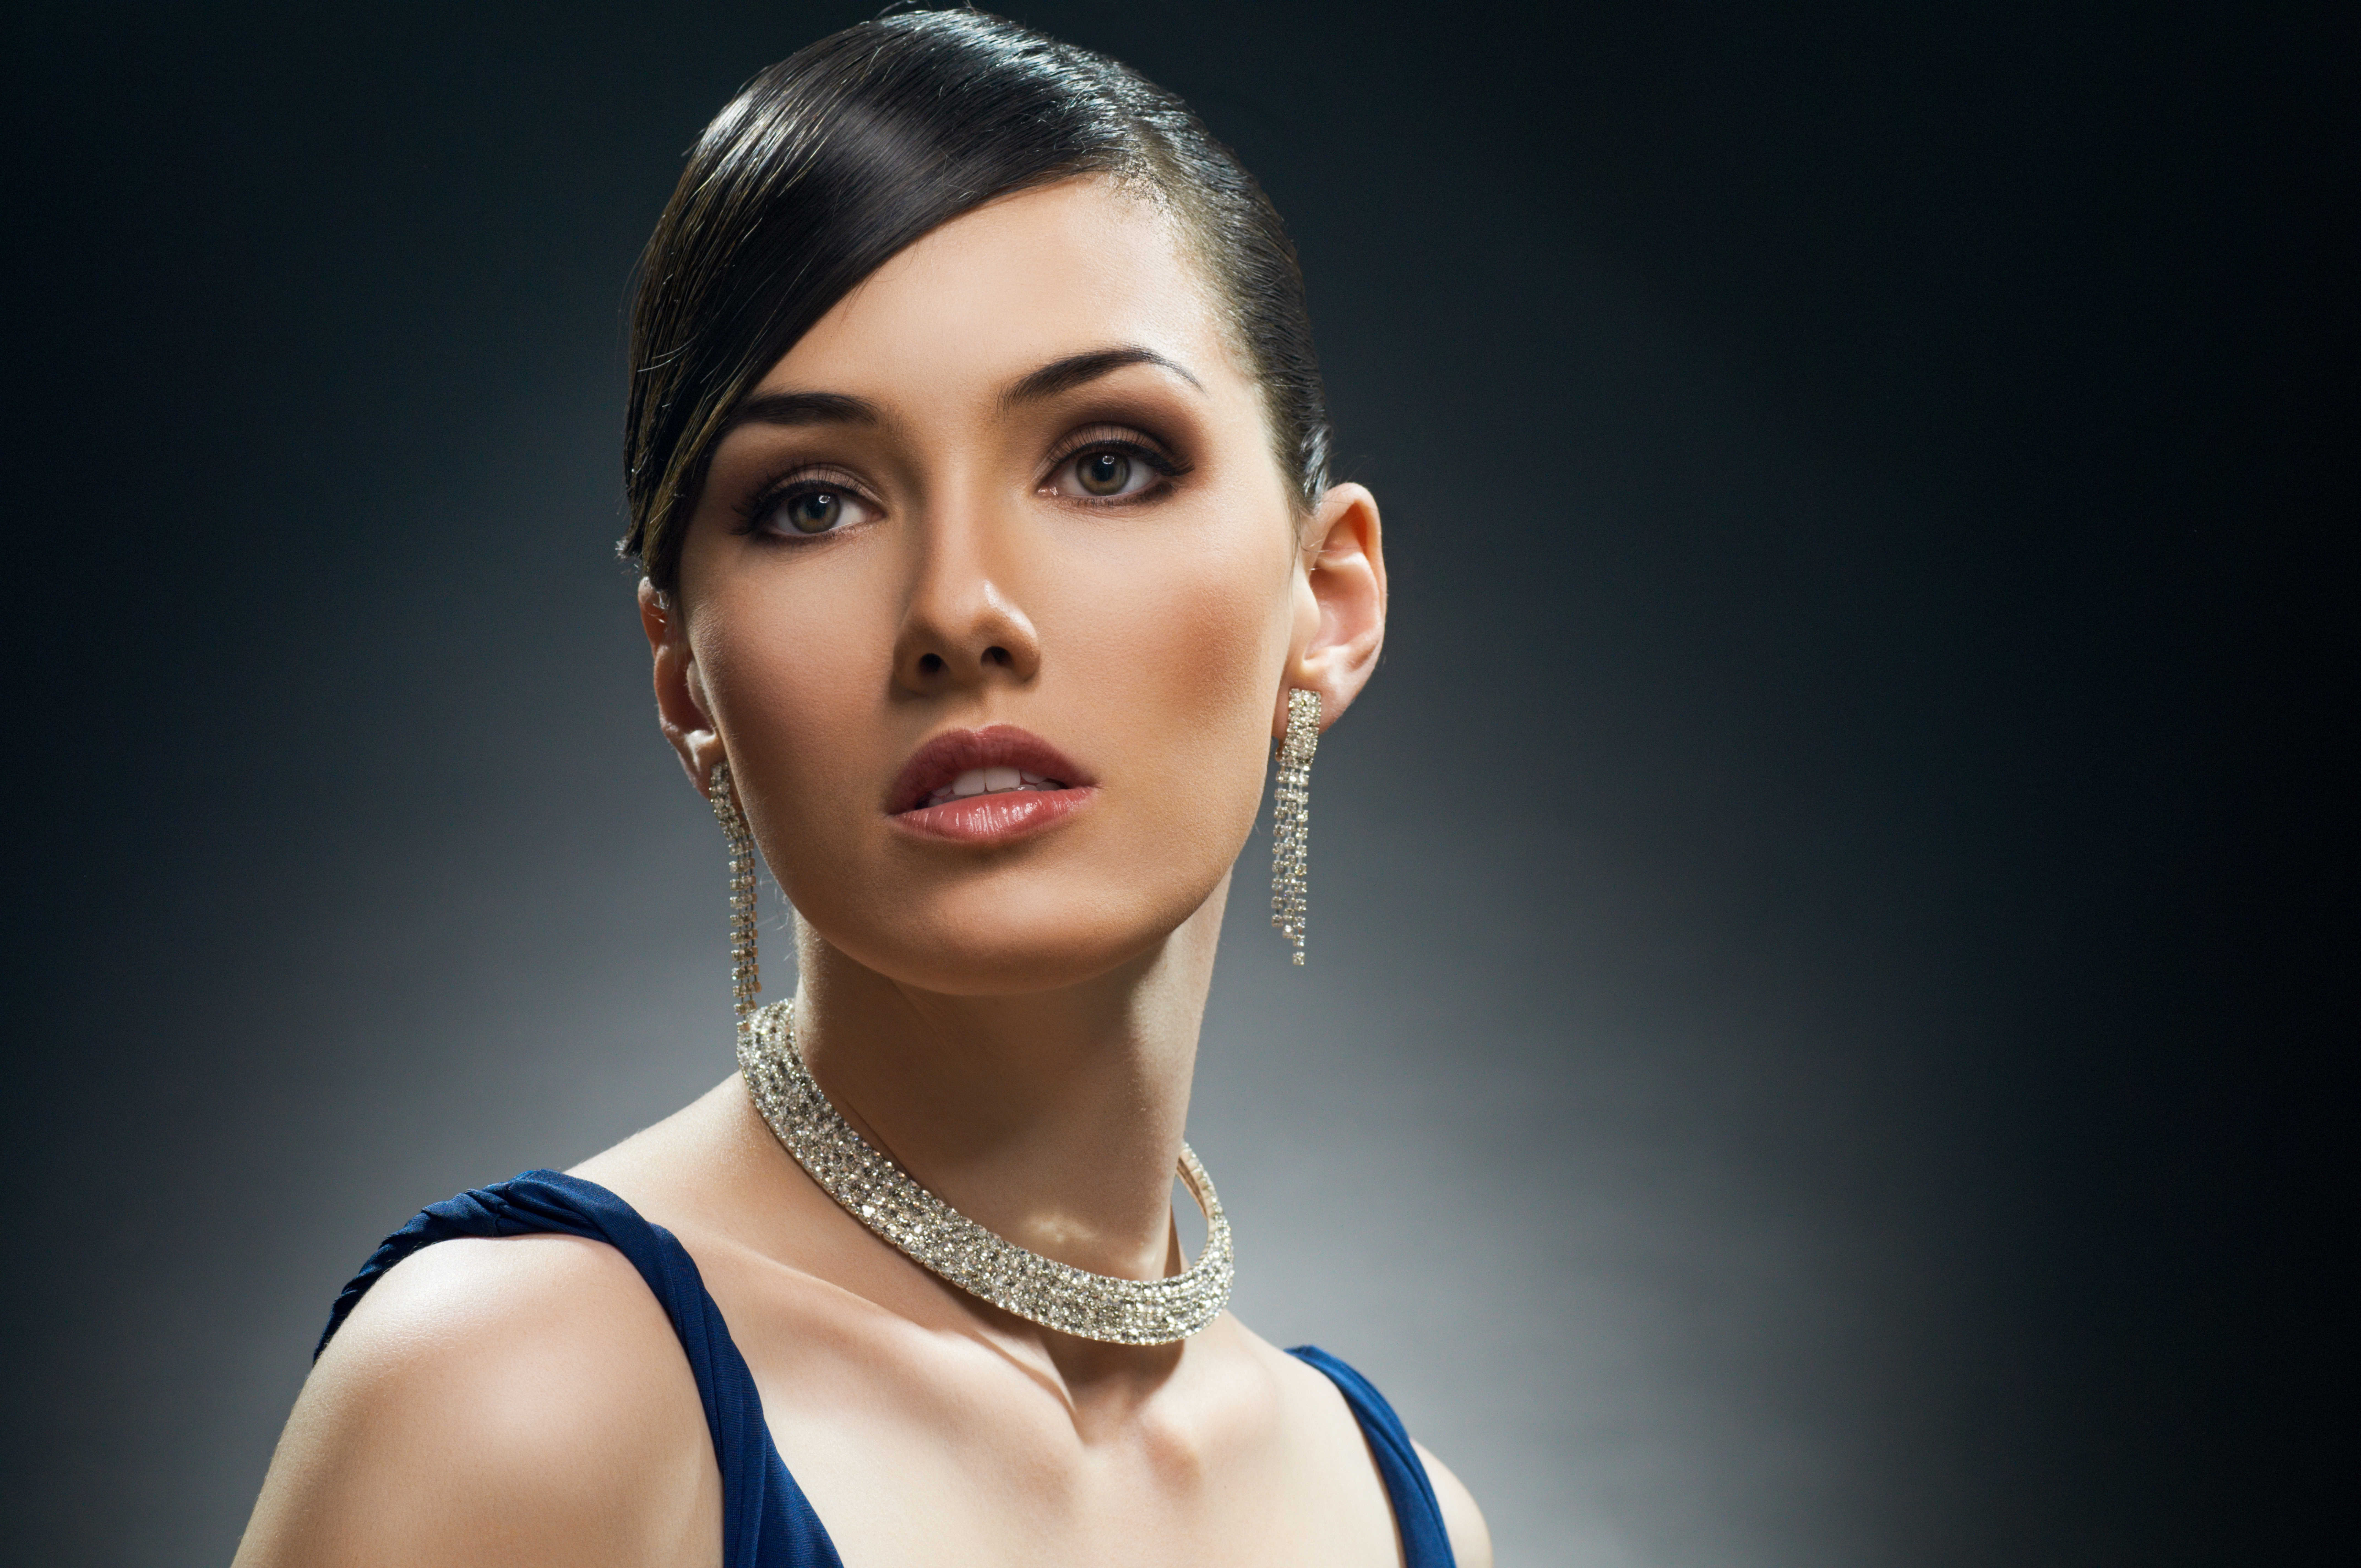 Woman with smooth side-swept bangs and hair pulled back